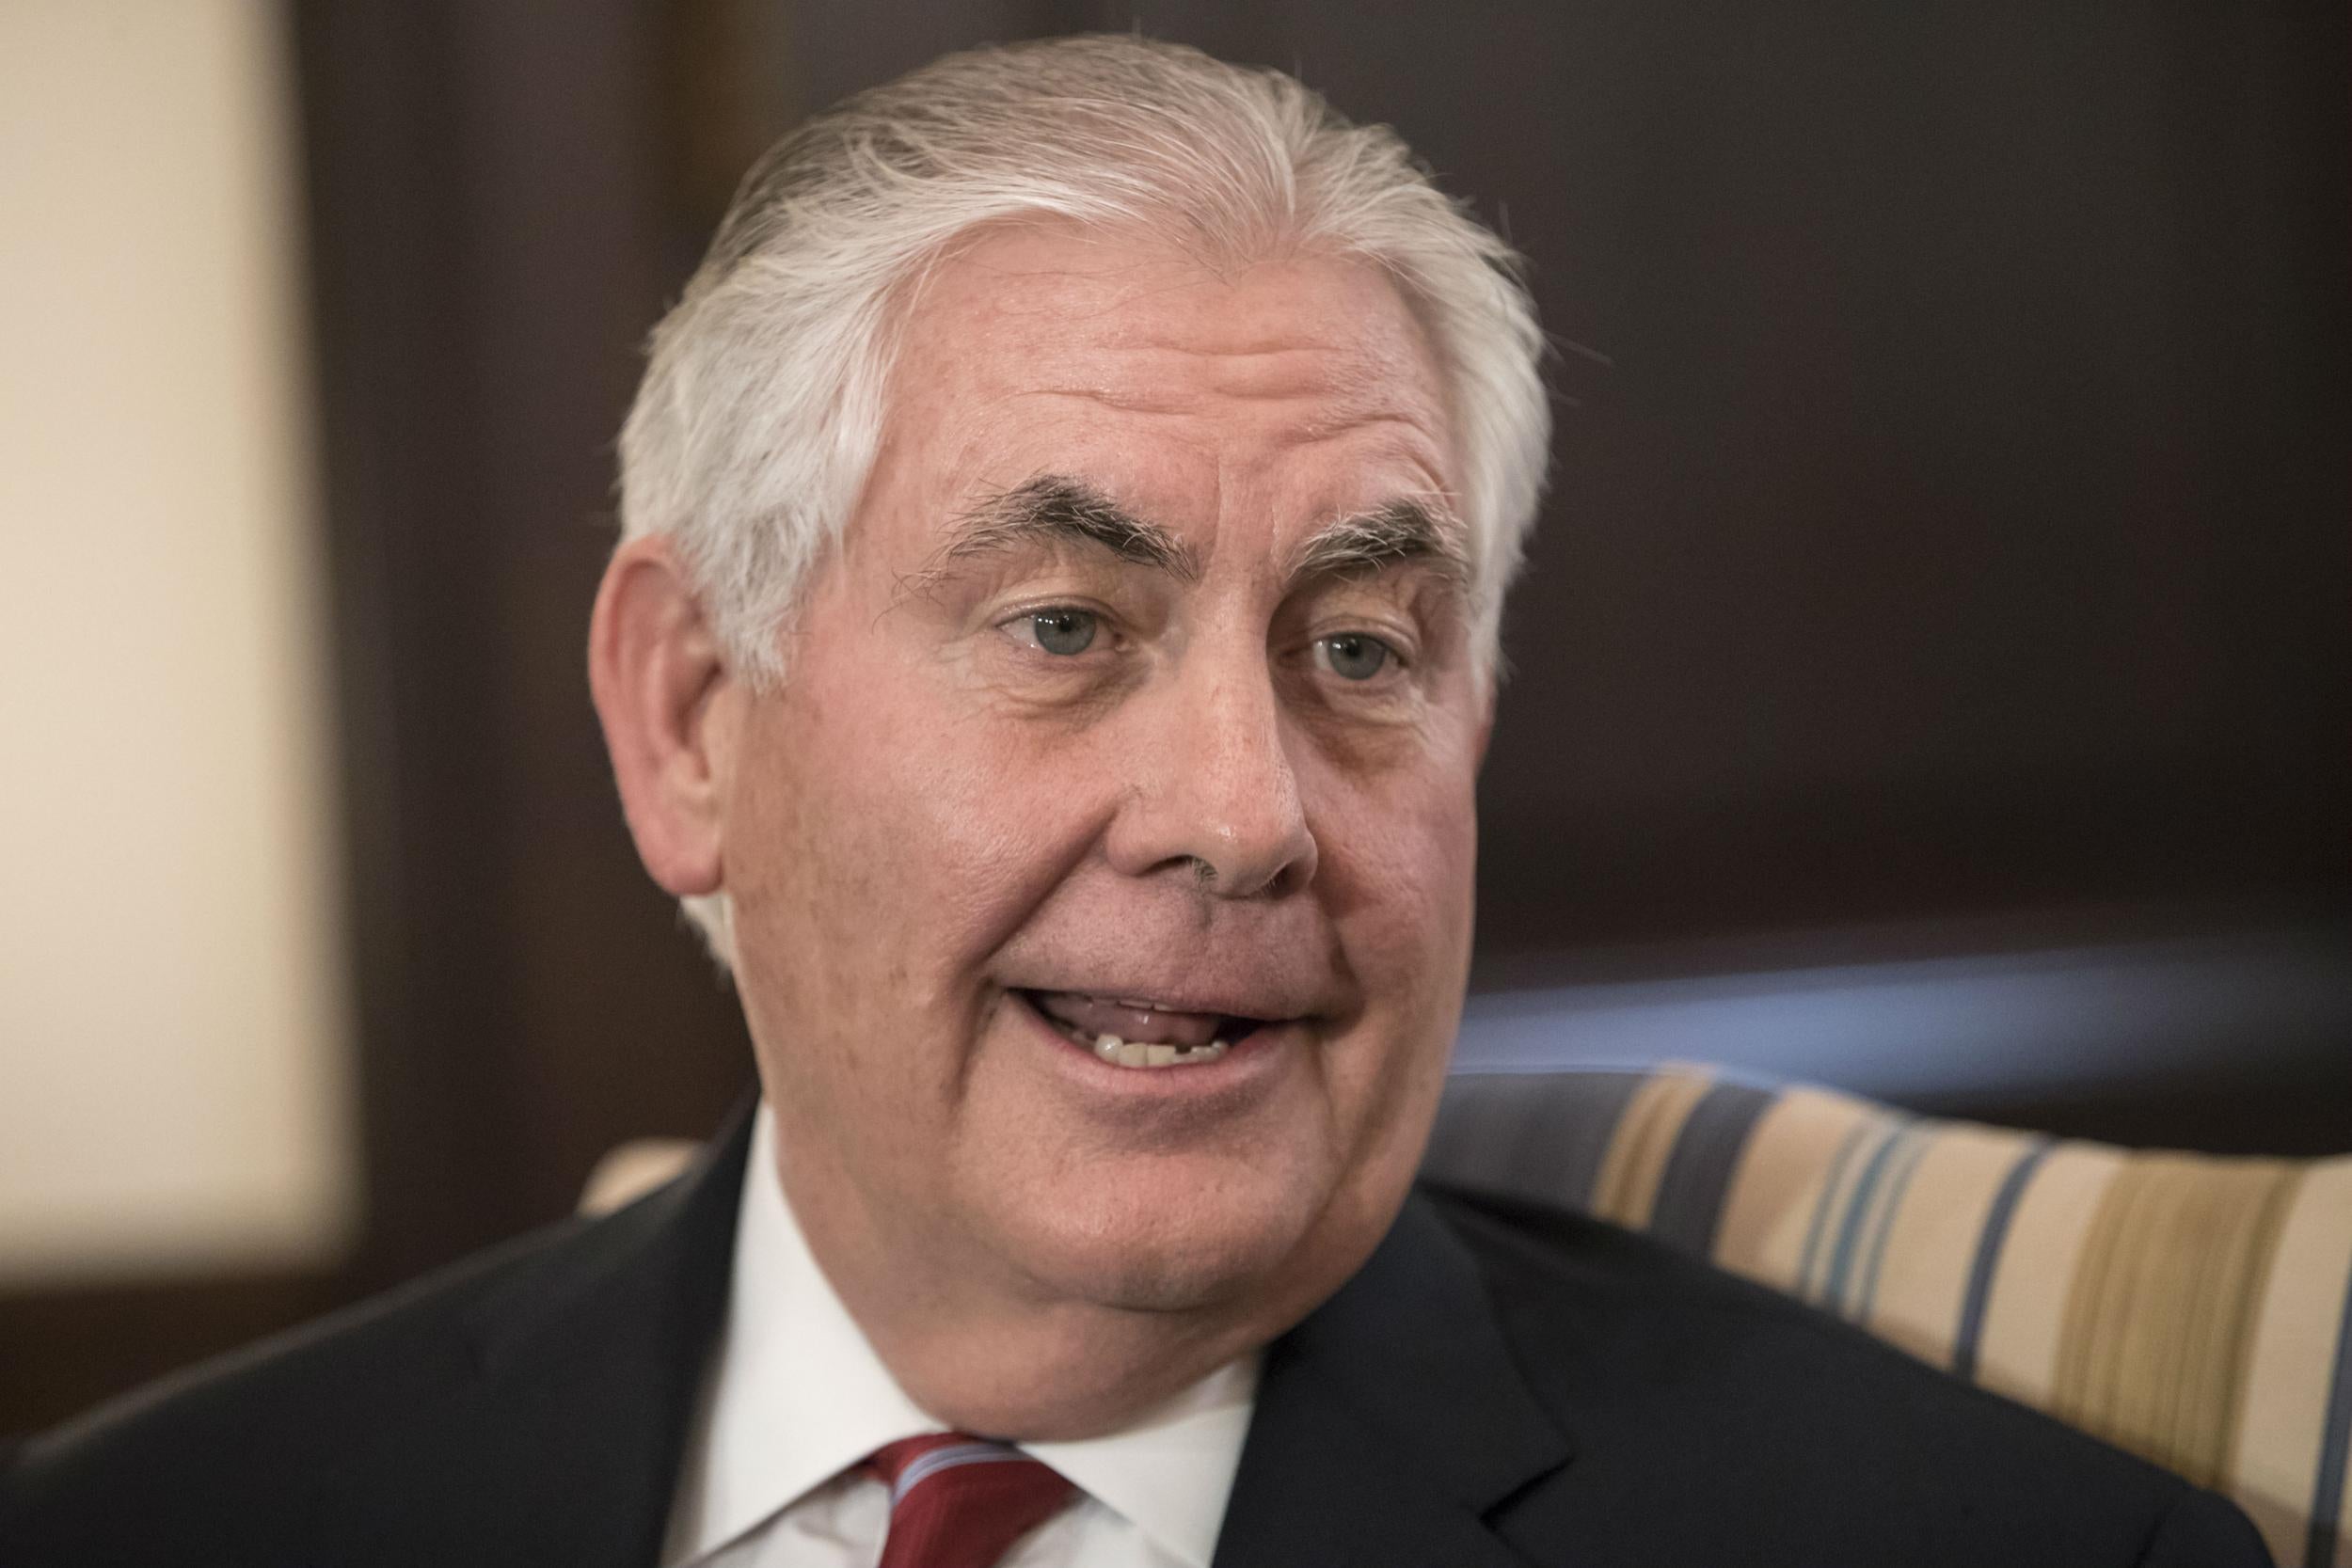 Mr Tillerson has to be confirmed as secretary of state by the US Senate